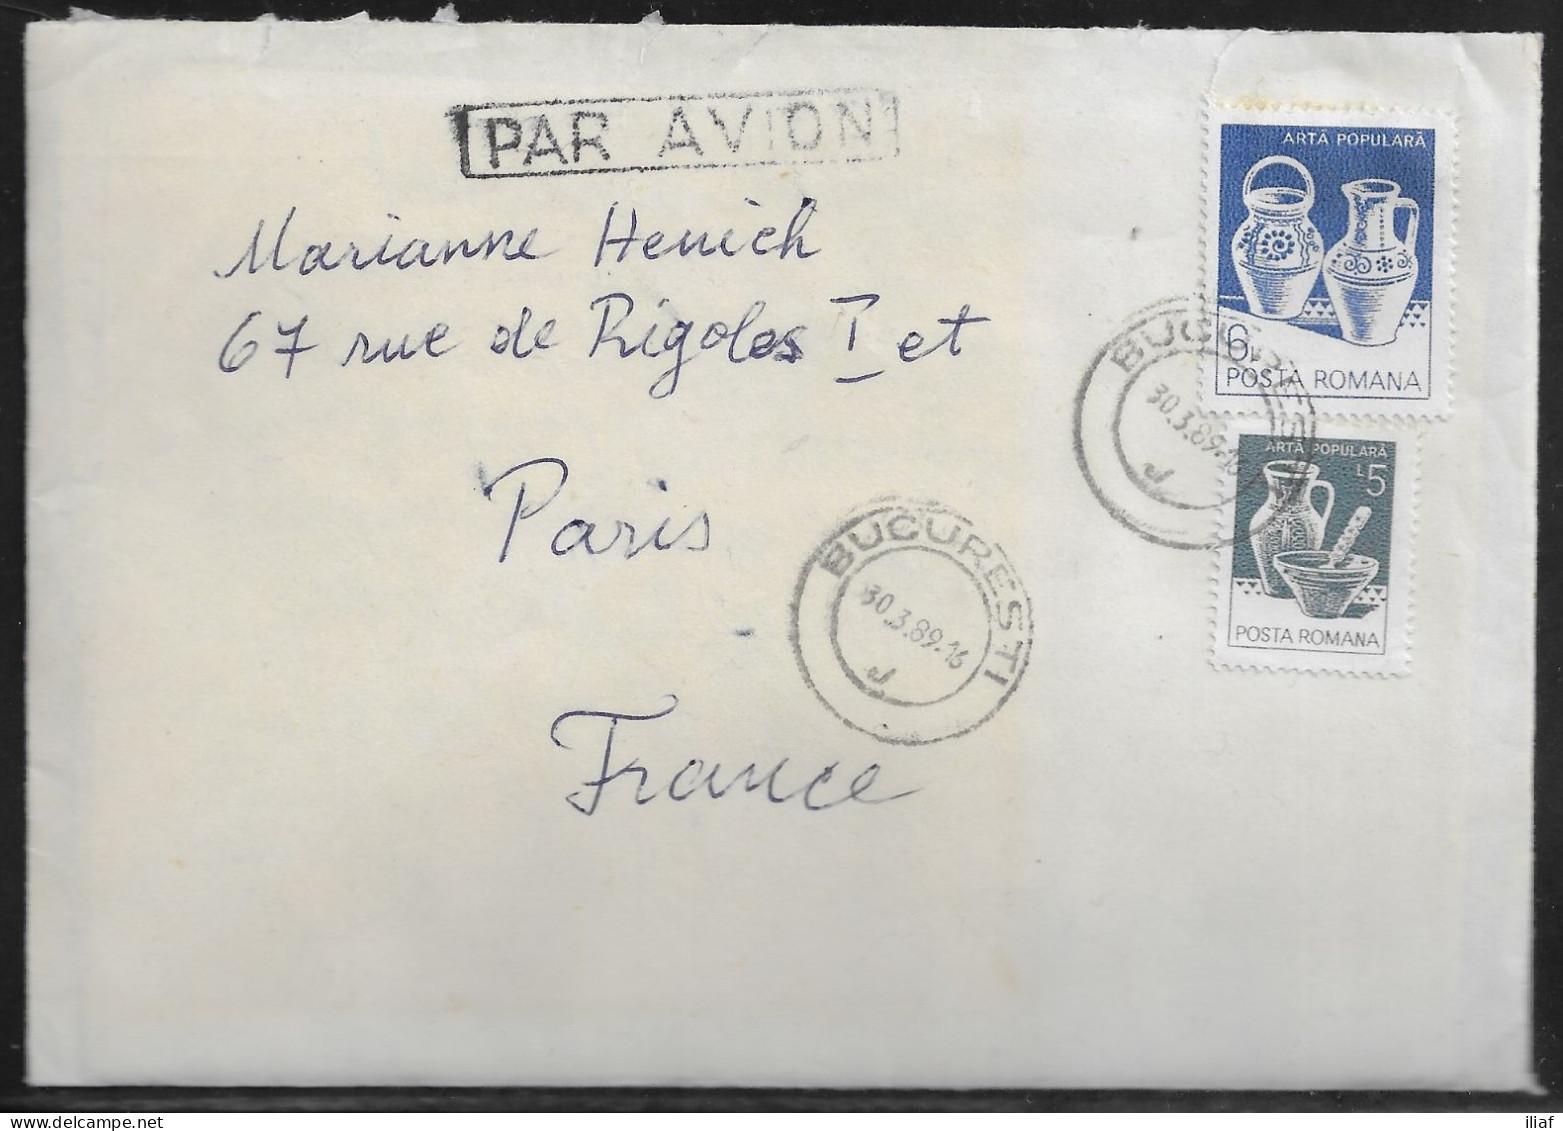 Romania. Stamps Sc. 3109-3110 On Air Mail Letter, Sent From Bucharest On 30.03.1989 To France. Letter Inside - Cartas & Documentos